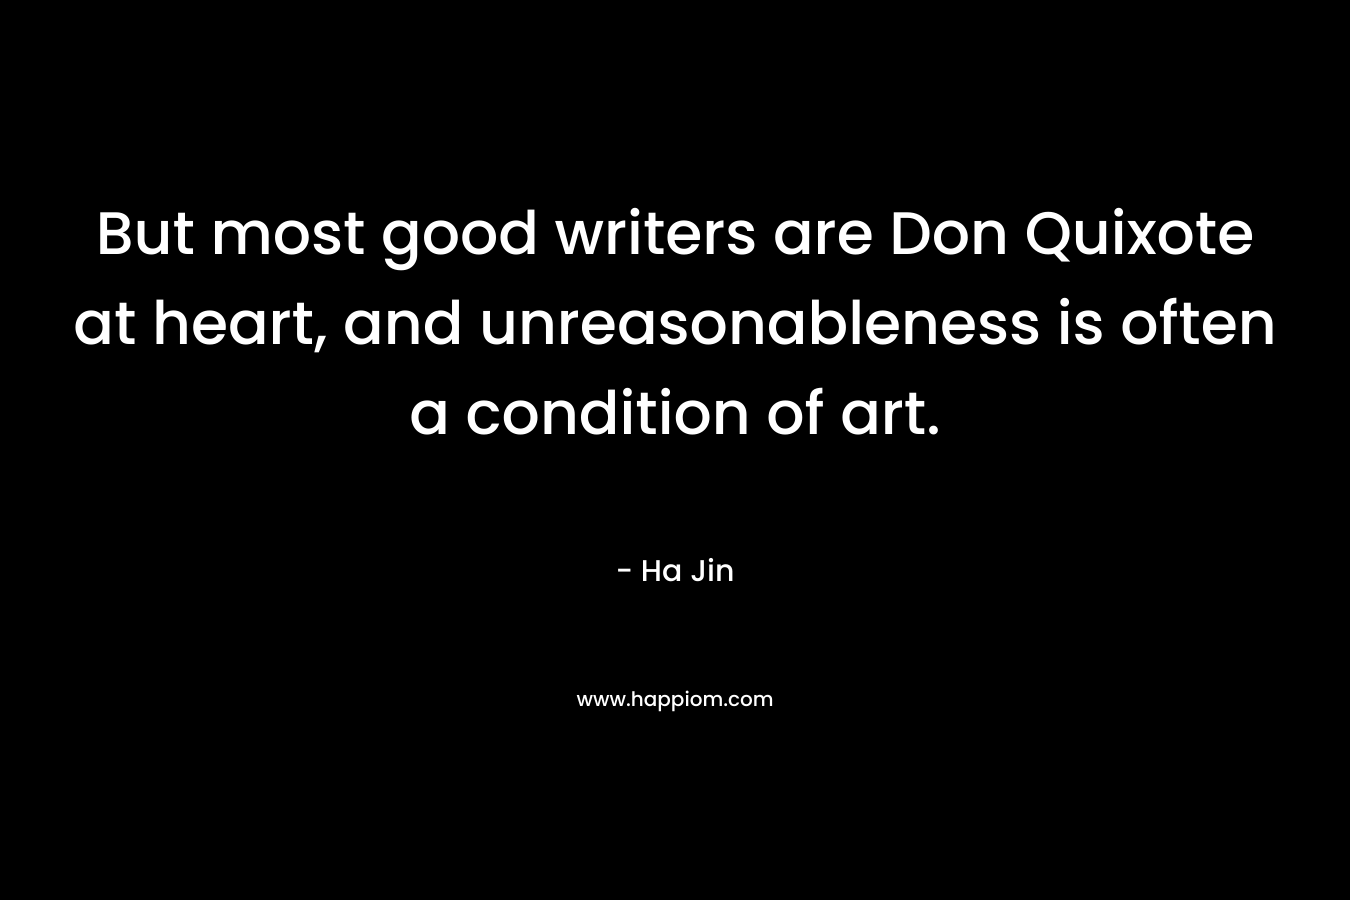 But most good writers are Don Quixote at heart, and unreasonableness is often a condition of art.